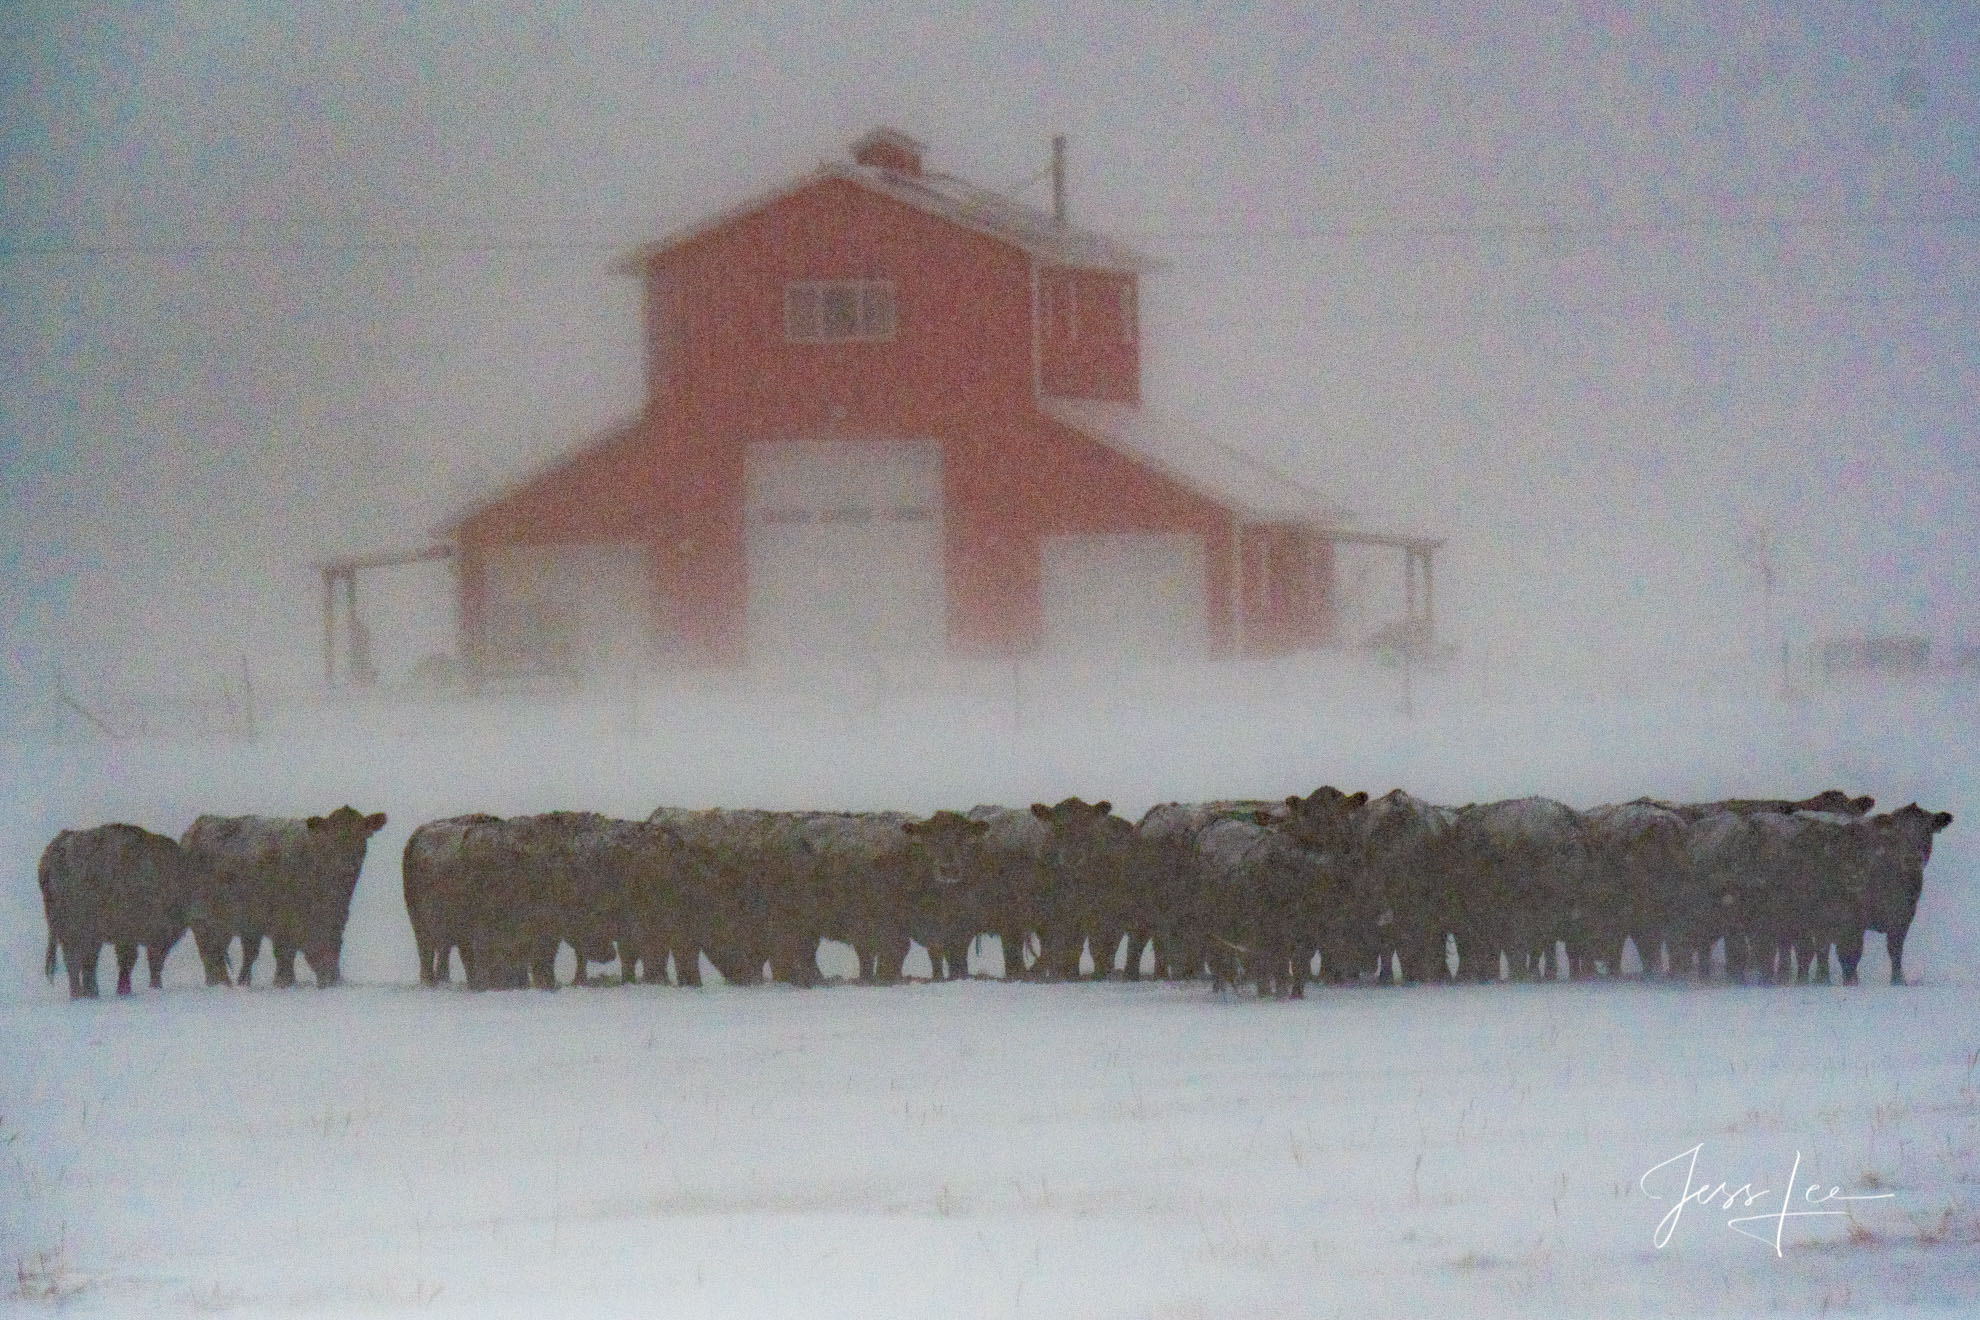 Fine Art Limited Edition Photography of Cowboys, Horses and life in the West. Montana cattle in a snow storm. This is part of...